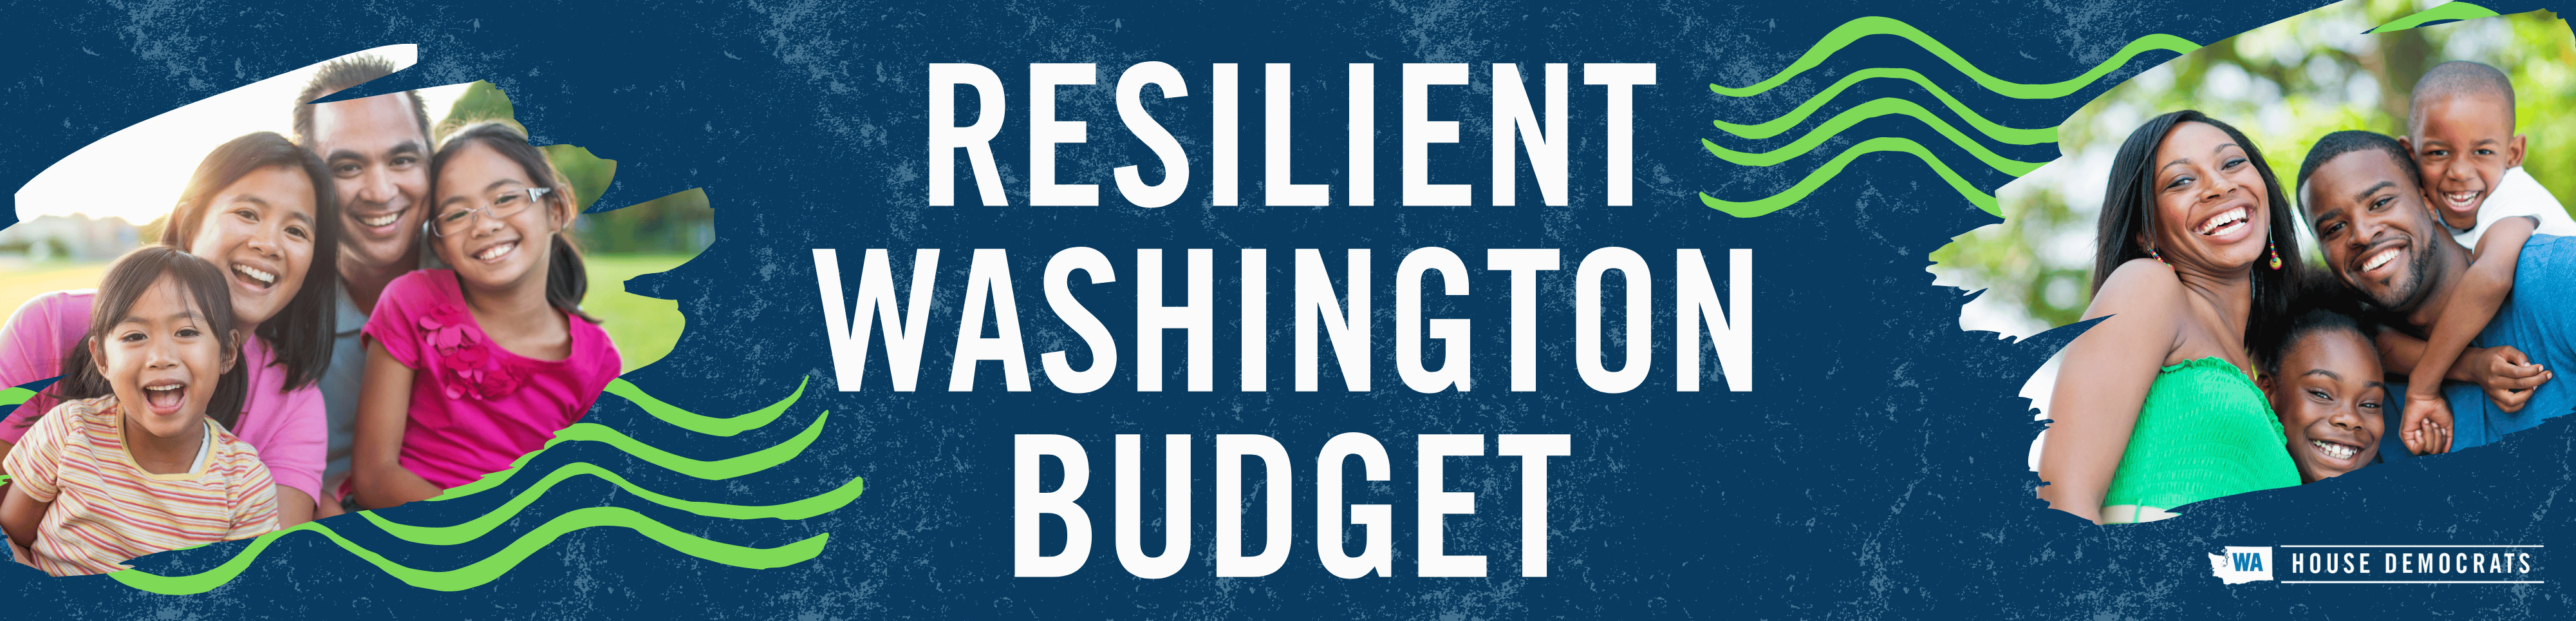 House Democrats released their Resilient Washington Budget on Monday March 27 2023.